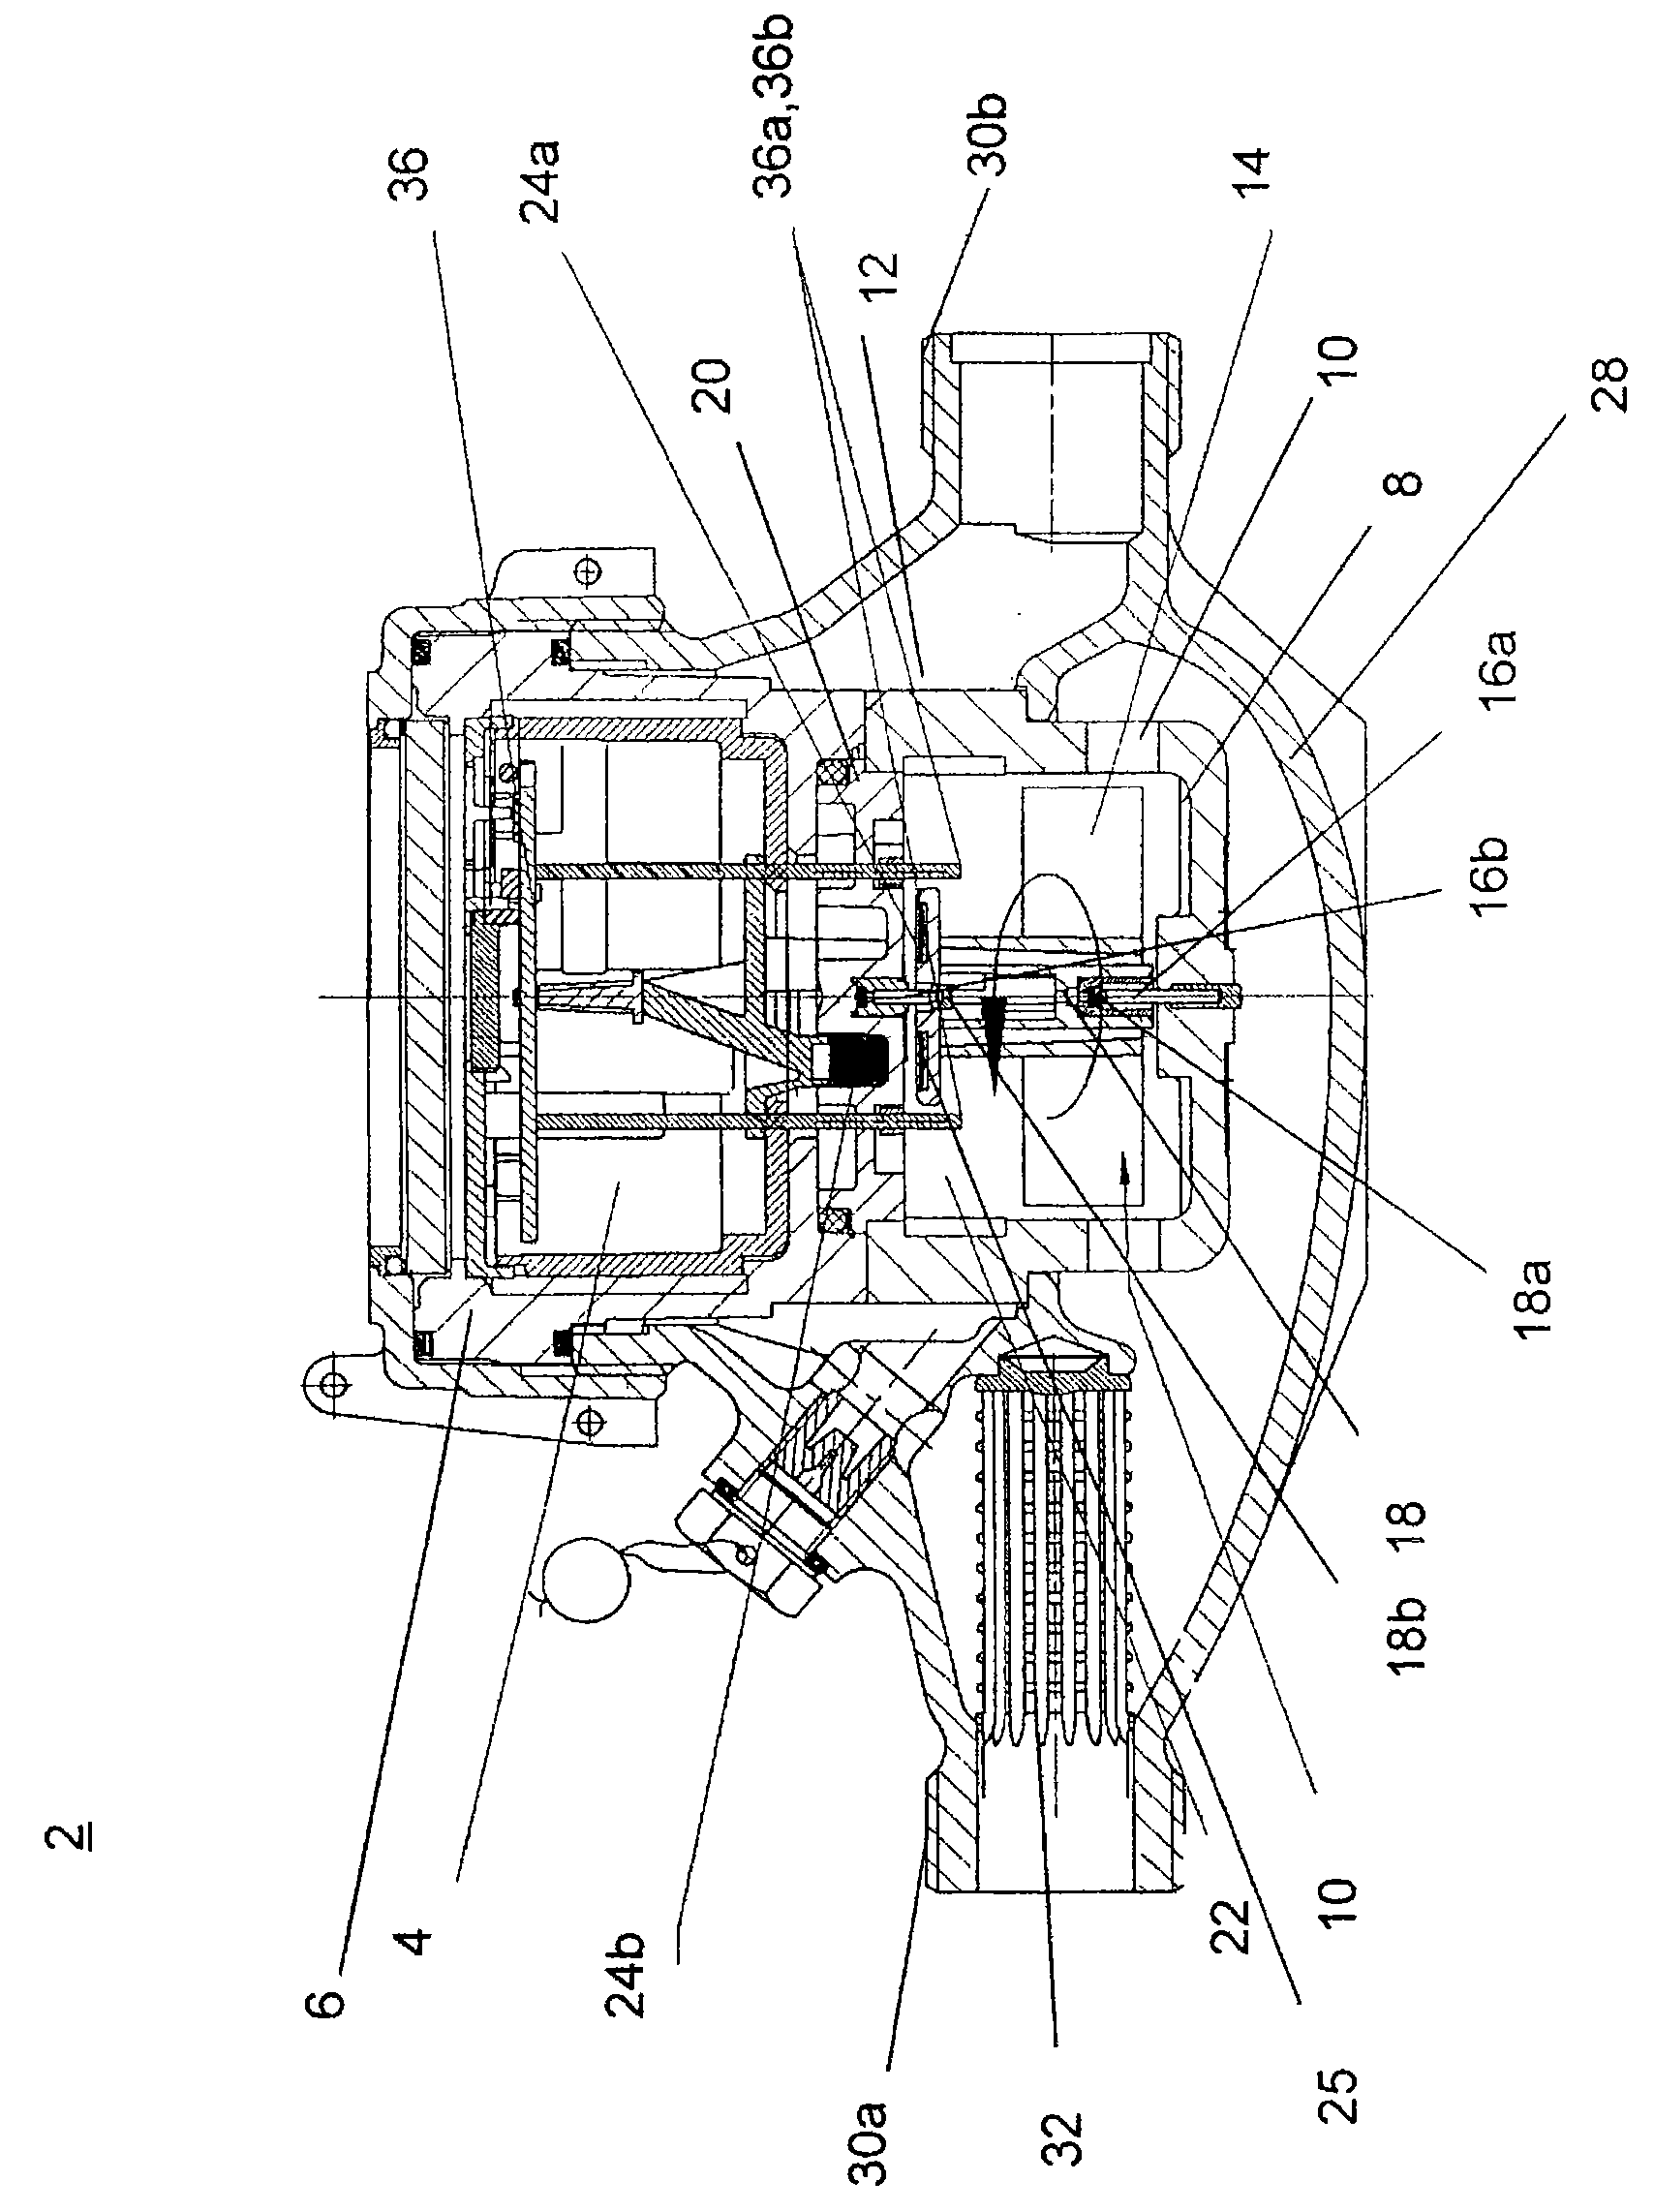 Volume meter for flowing media with selective coupling between counter system and calculating unit